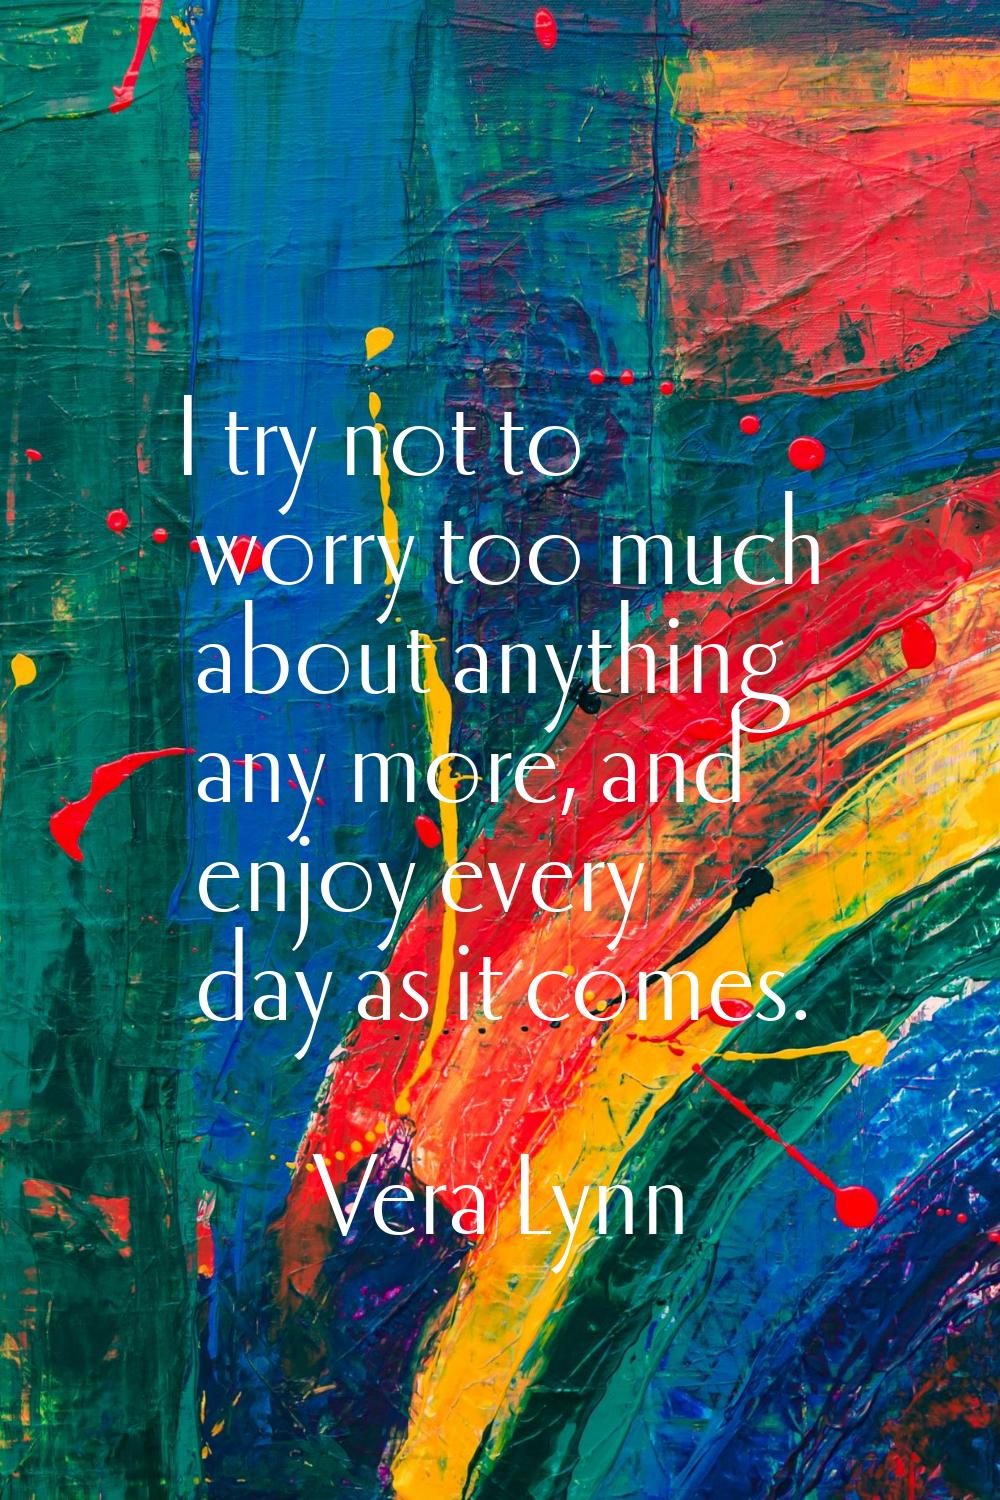 I try not to worry too much about anything any more, and enjoy every day as it comes.